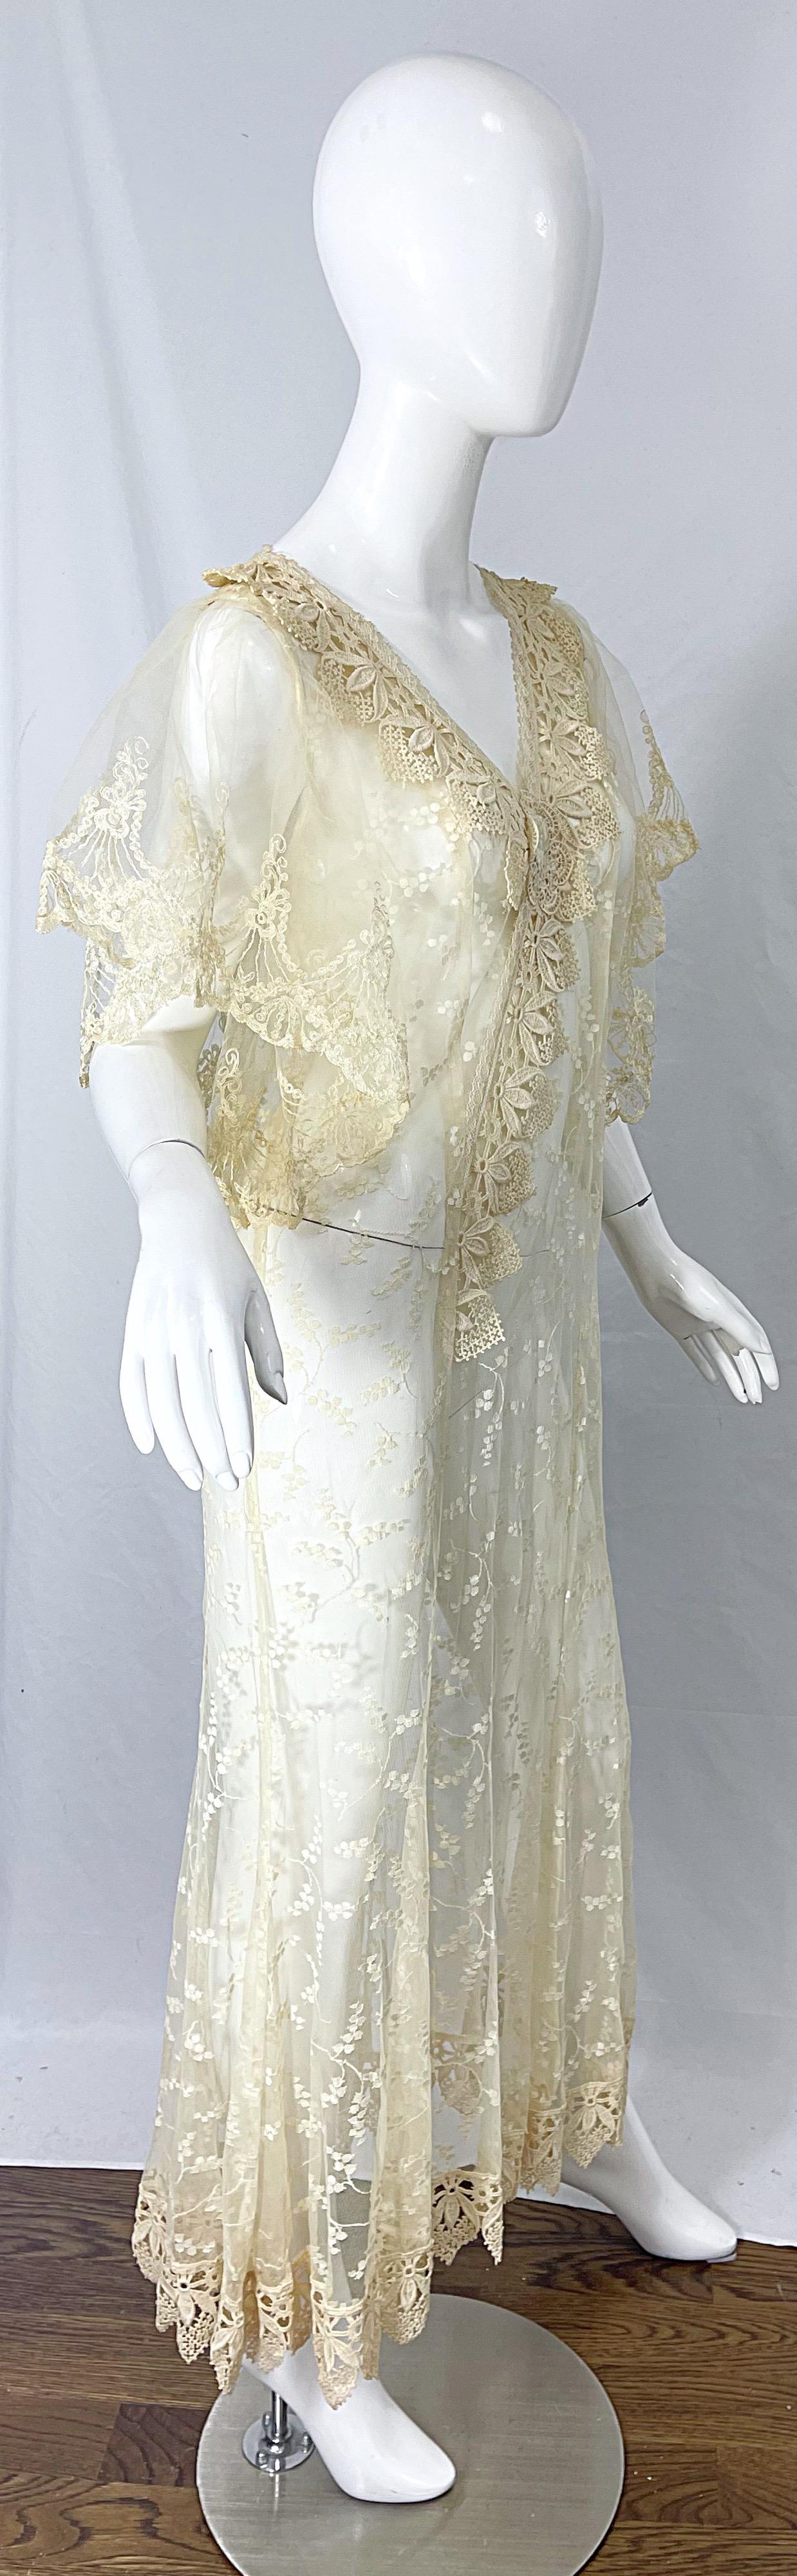 Lorrie Kabala 1980s Ivory Lace Sheer Size 8 Vintage 80s Caftan Maxi Dress For Sale 4